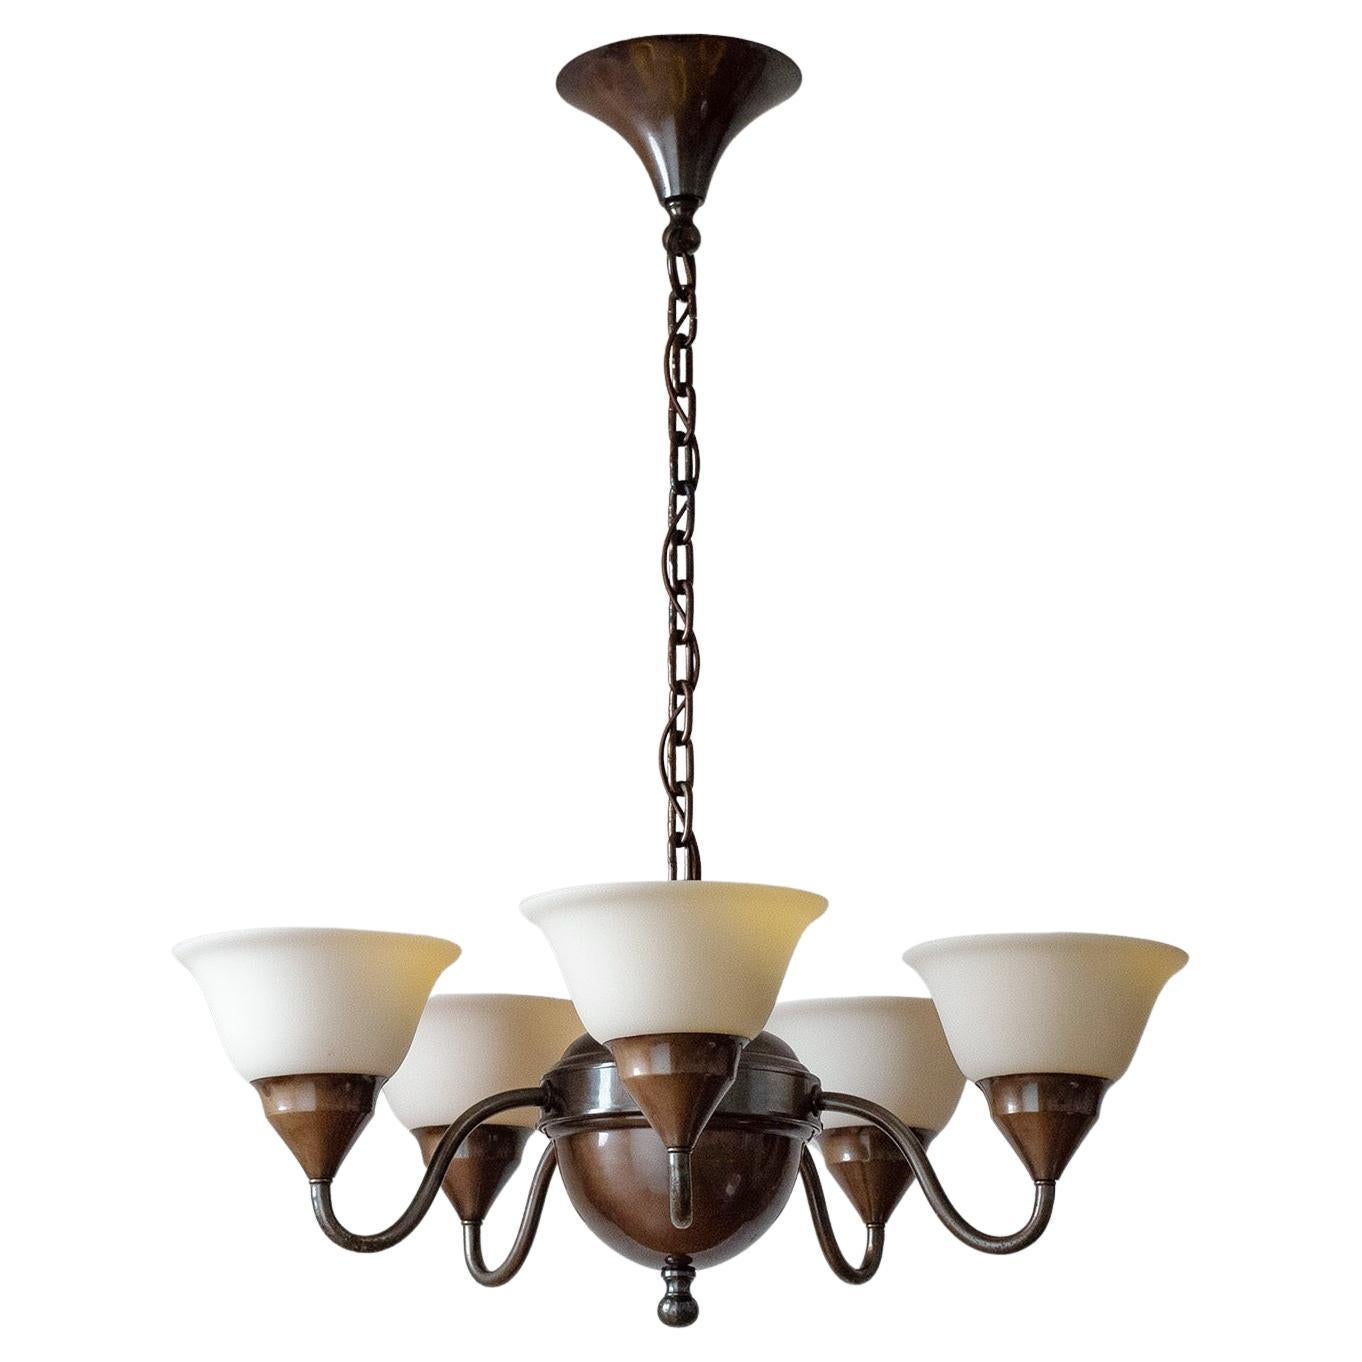 Swedish Patinated Brass Chandelier, 1920s, Enameled Glass